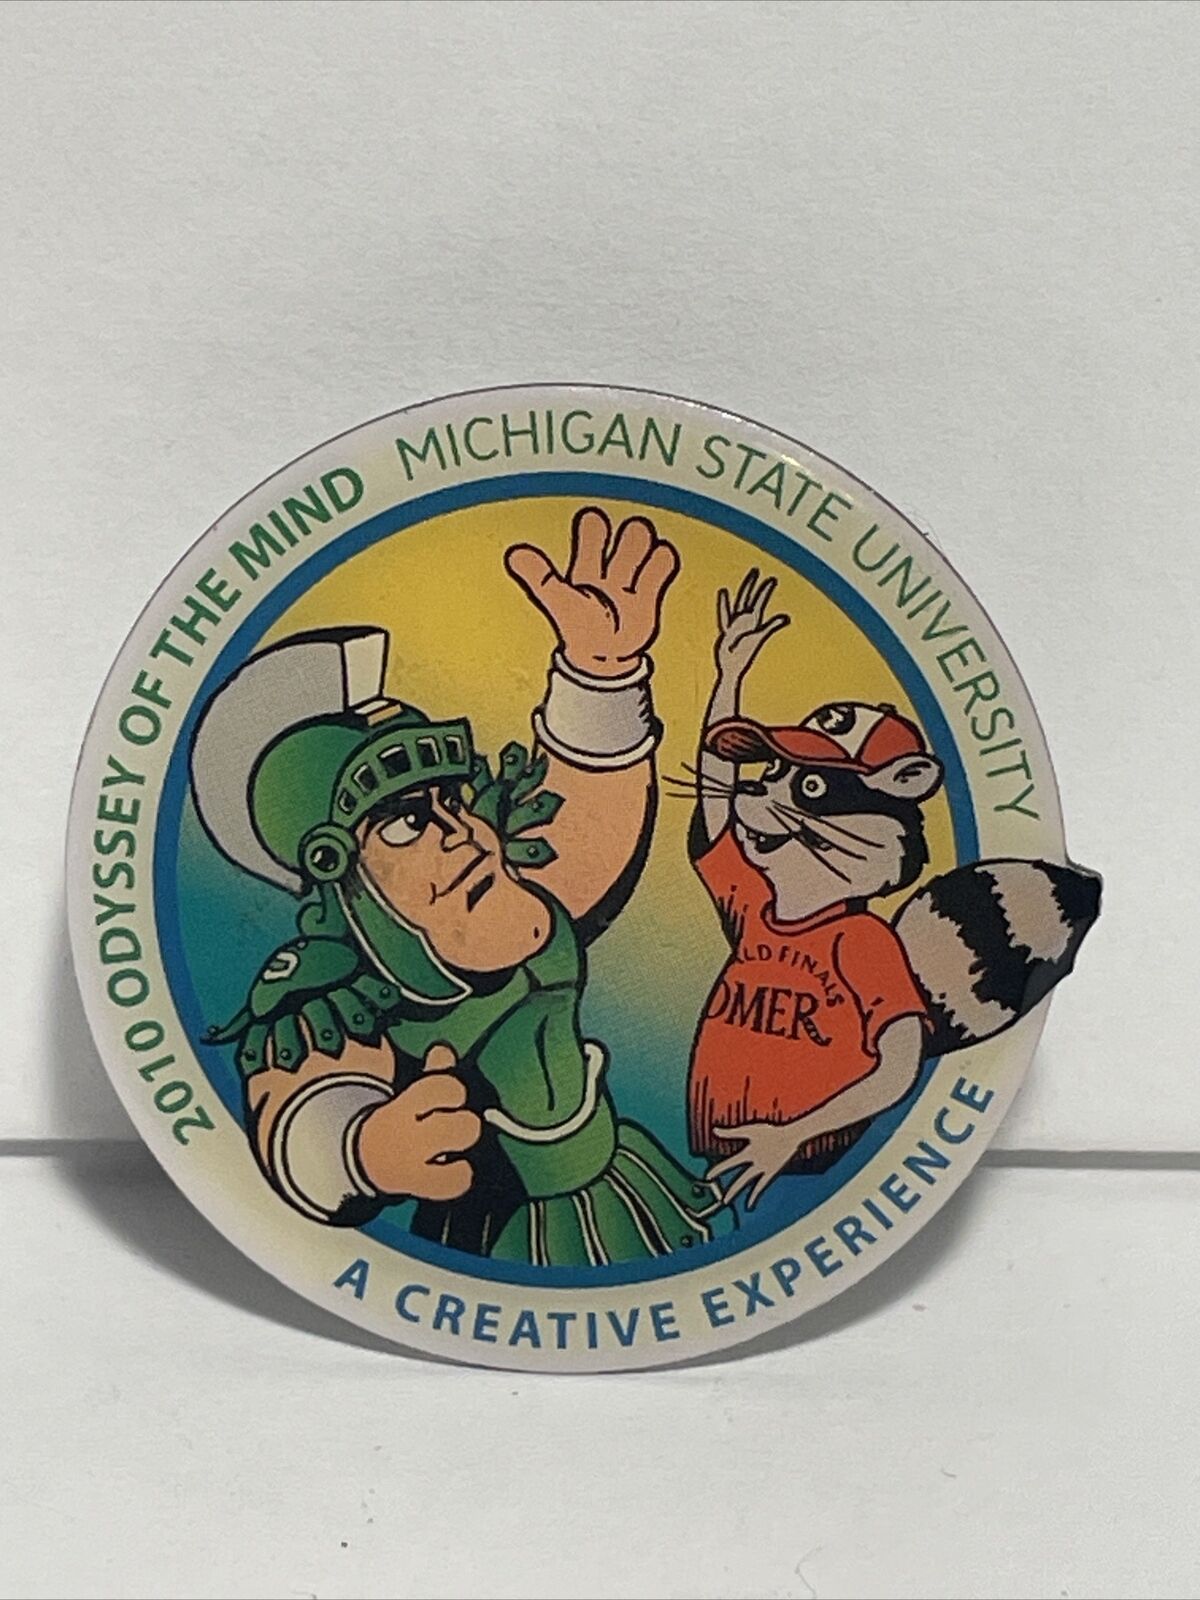 Official 2010 Michigan State University Odyssey of the Mind Pin - SPARTAN & OMER